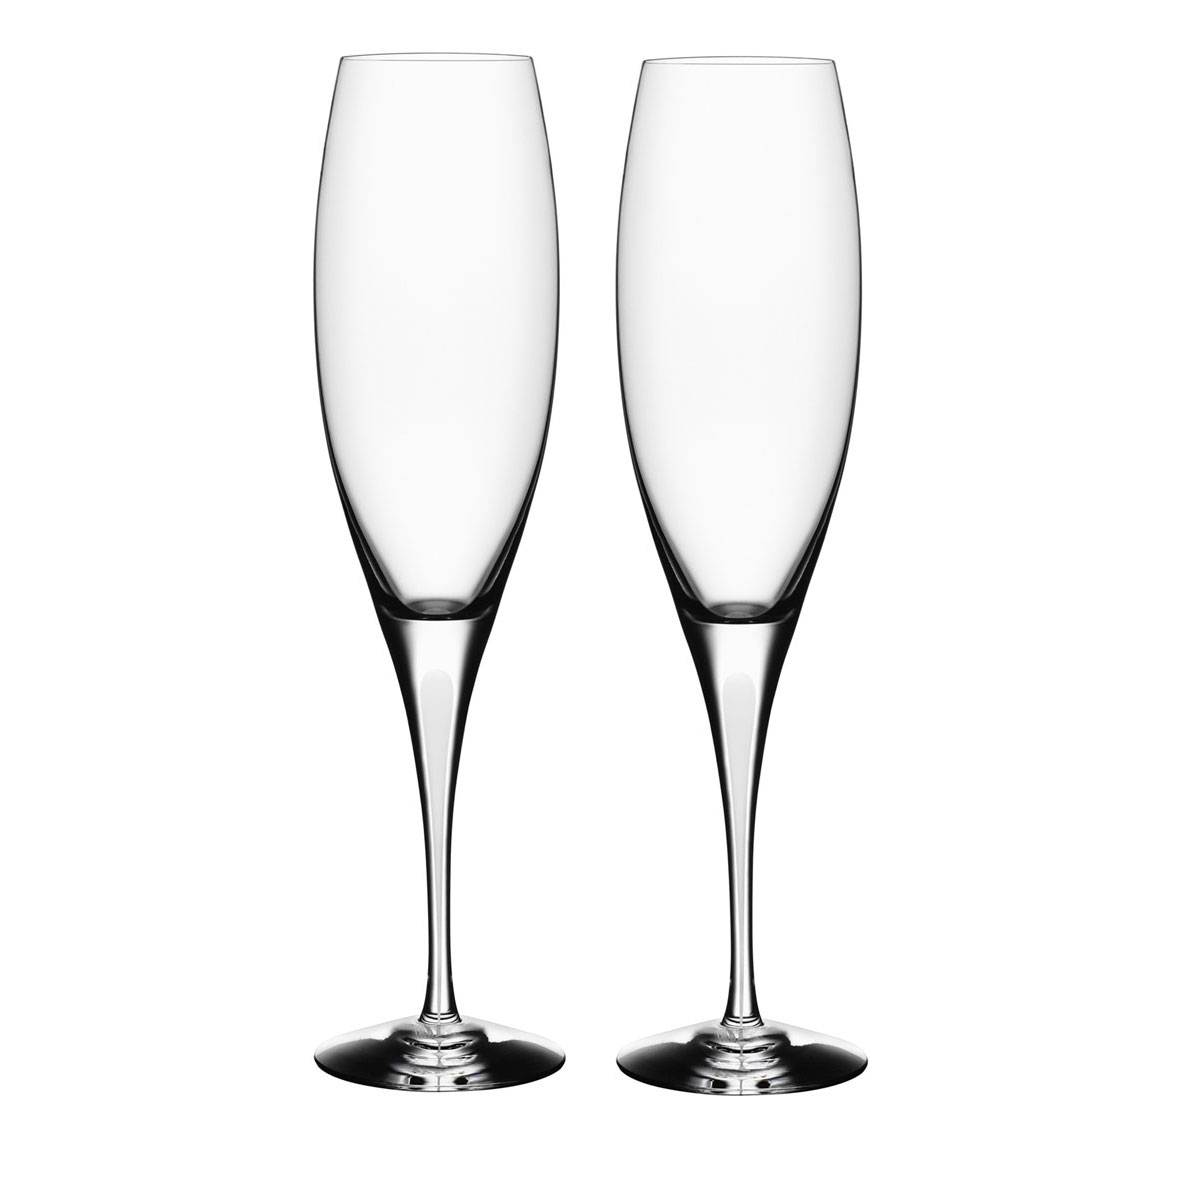 Orrefors Love and Happiness Intermezzo Satin Champagne Flute, Pair